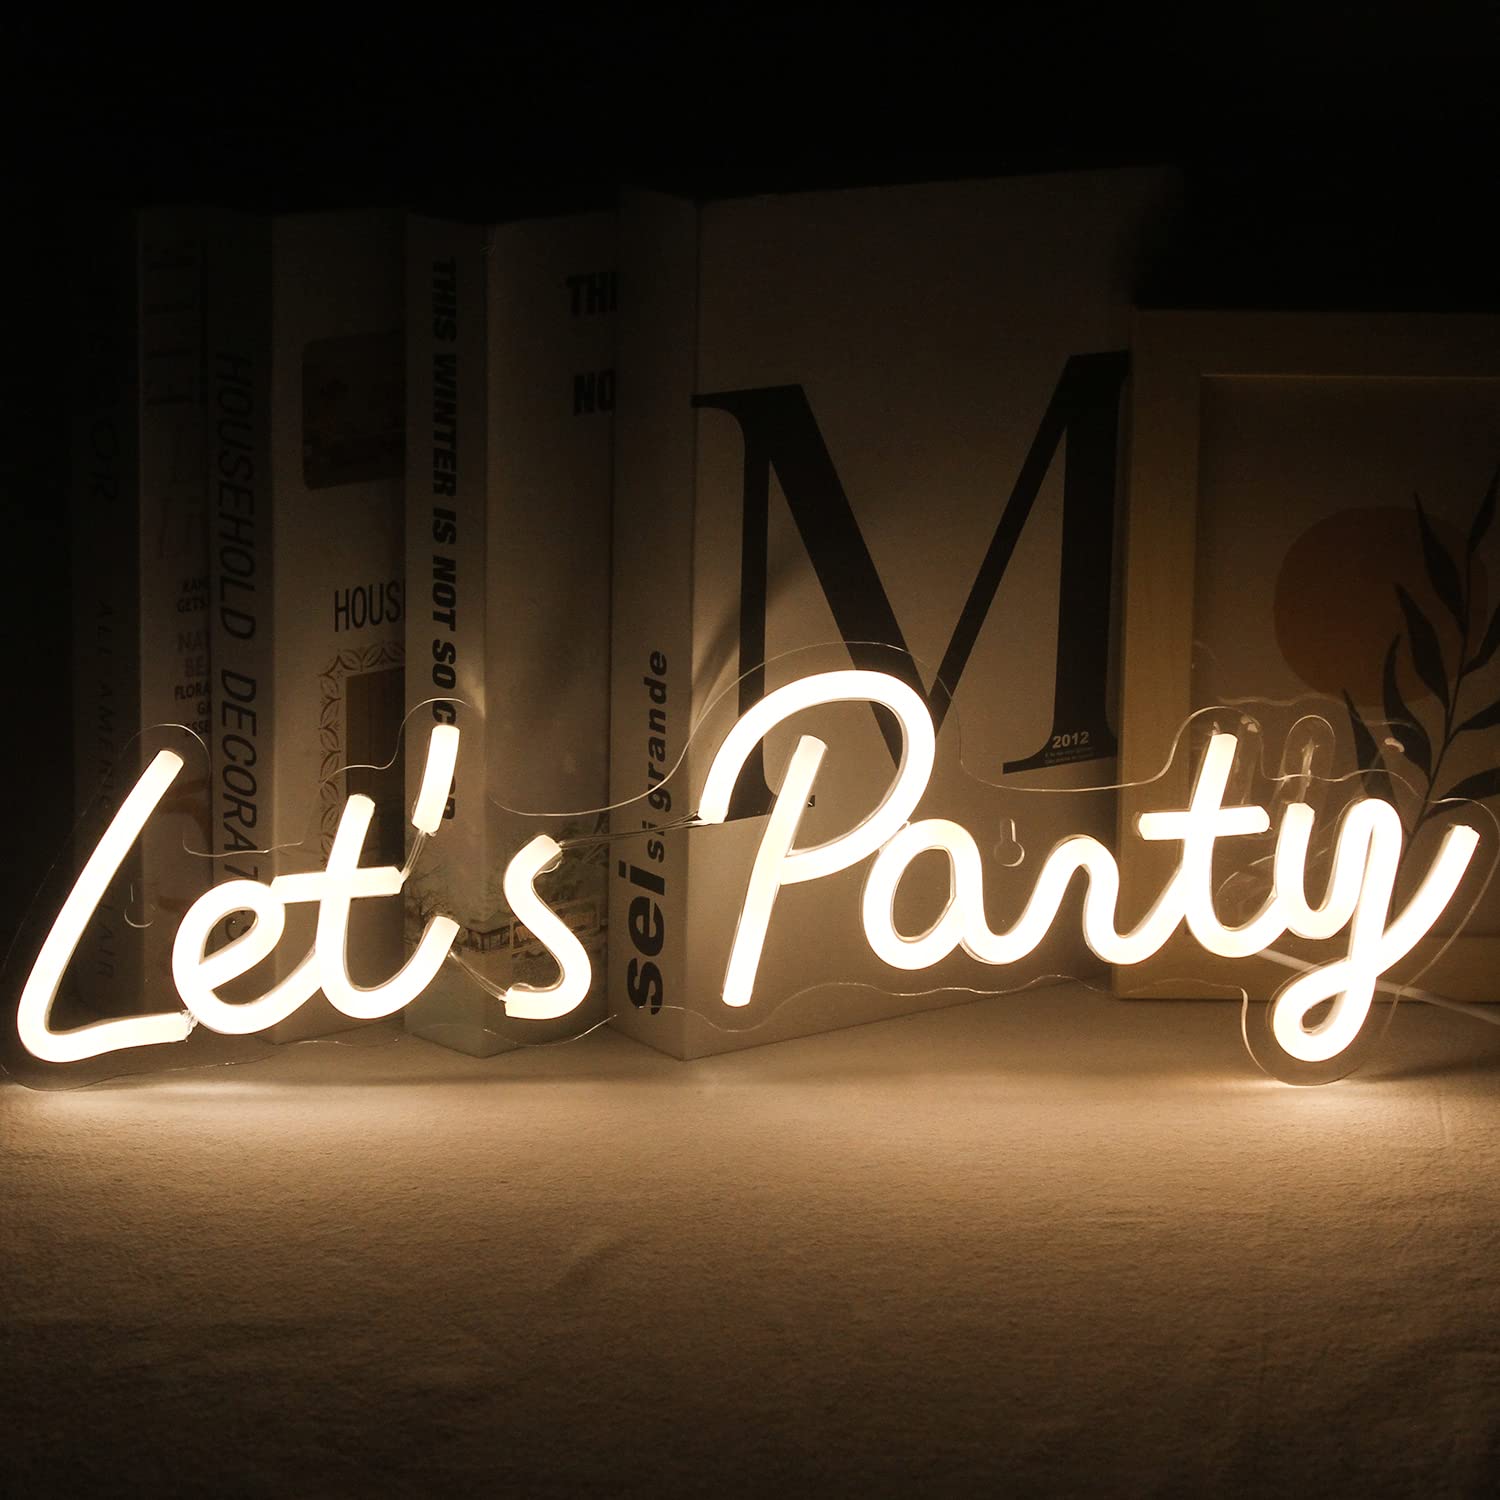 SIGNSHIP Let's Party Neon Signs Led Neon Light,USB Powered Cool Party Neon Sign Acrylic Art Wall Decoration for Christmas Birthday Wedding Party Living Room Bar Decor Gift